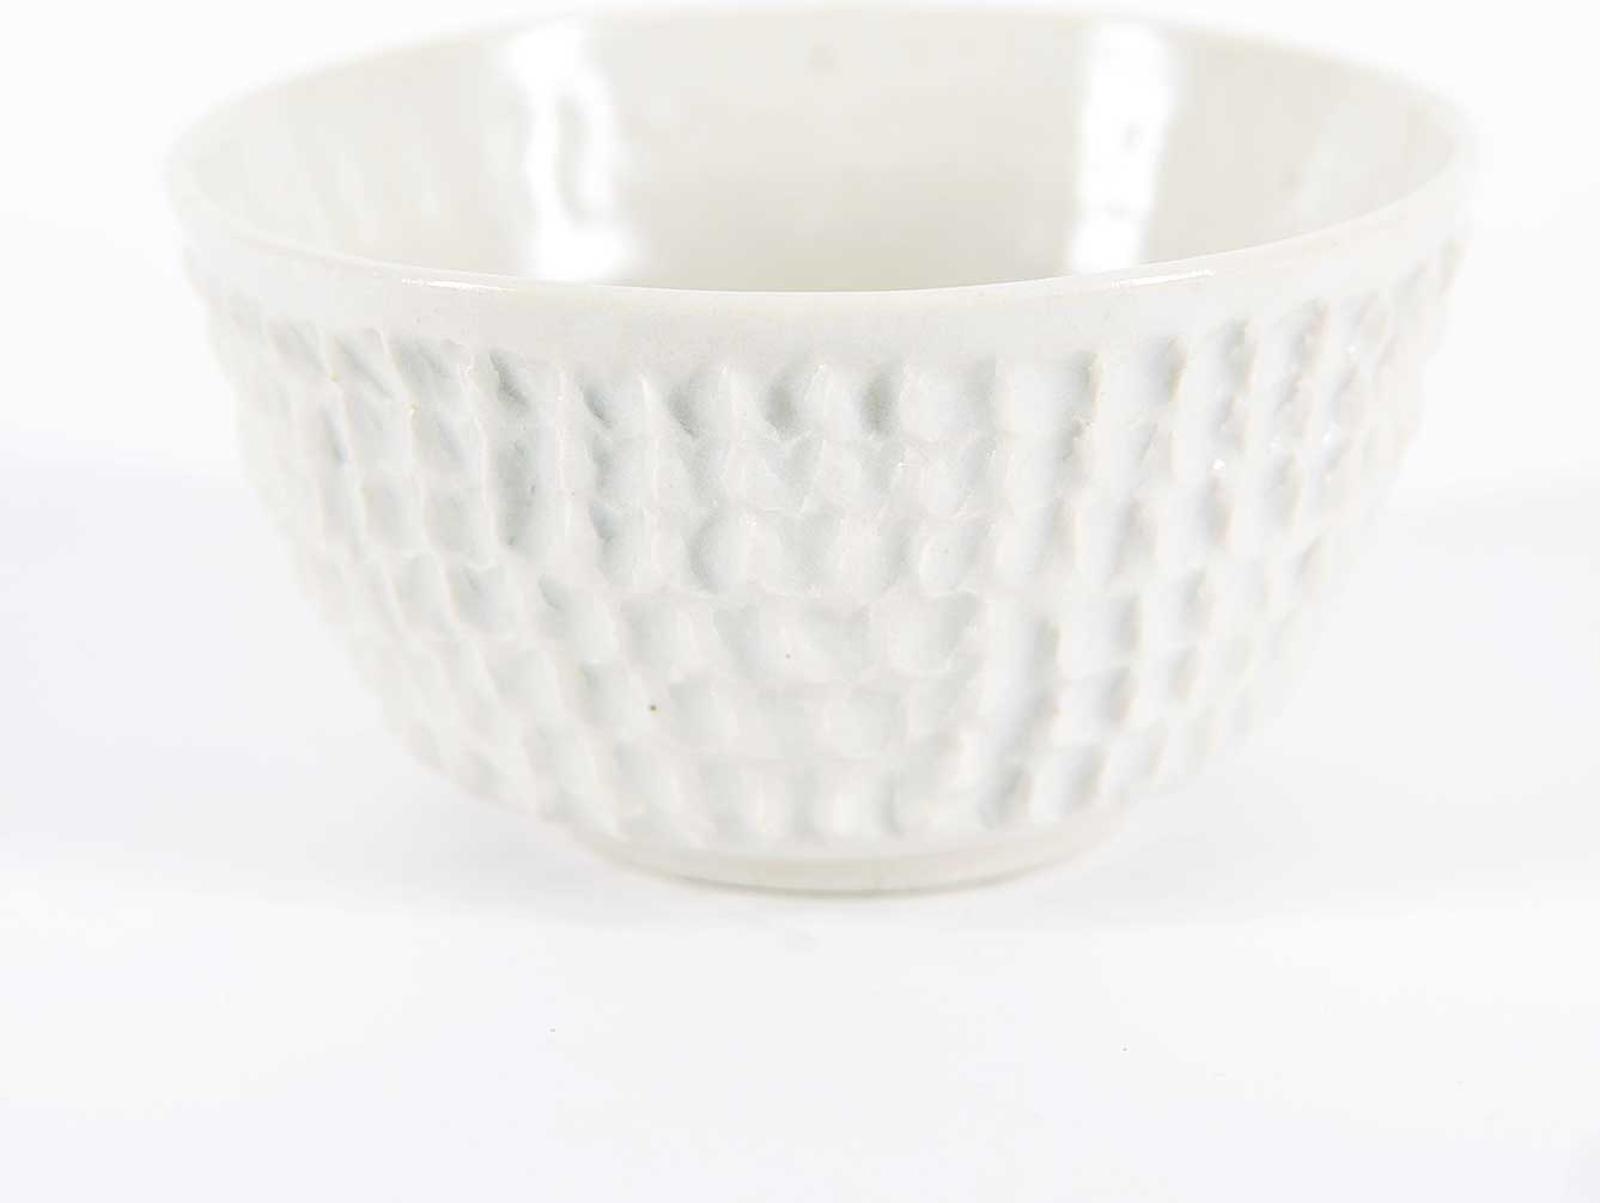 Ludwig - Untitled - Textured White Bowl